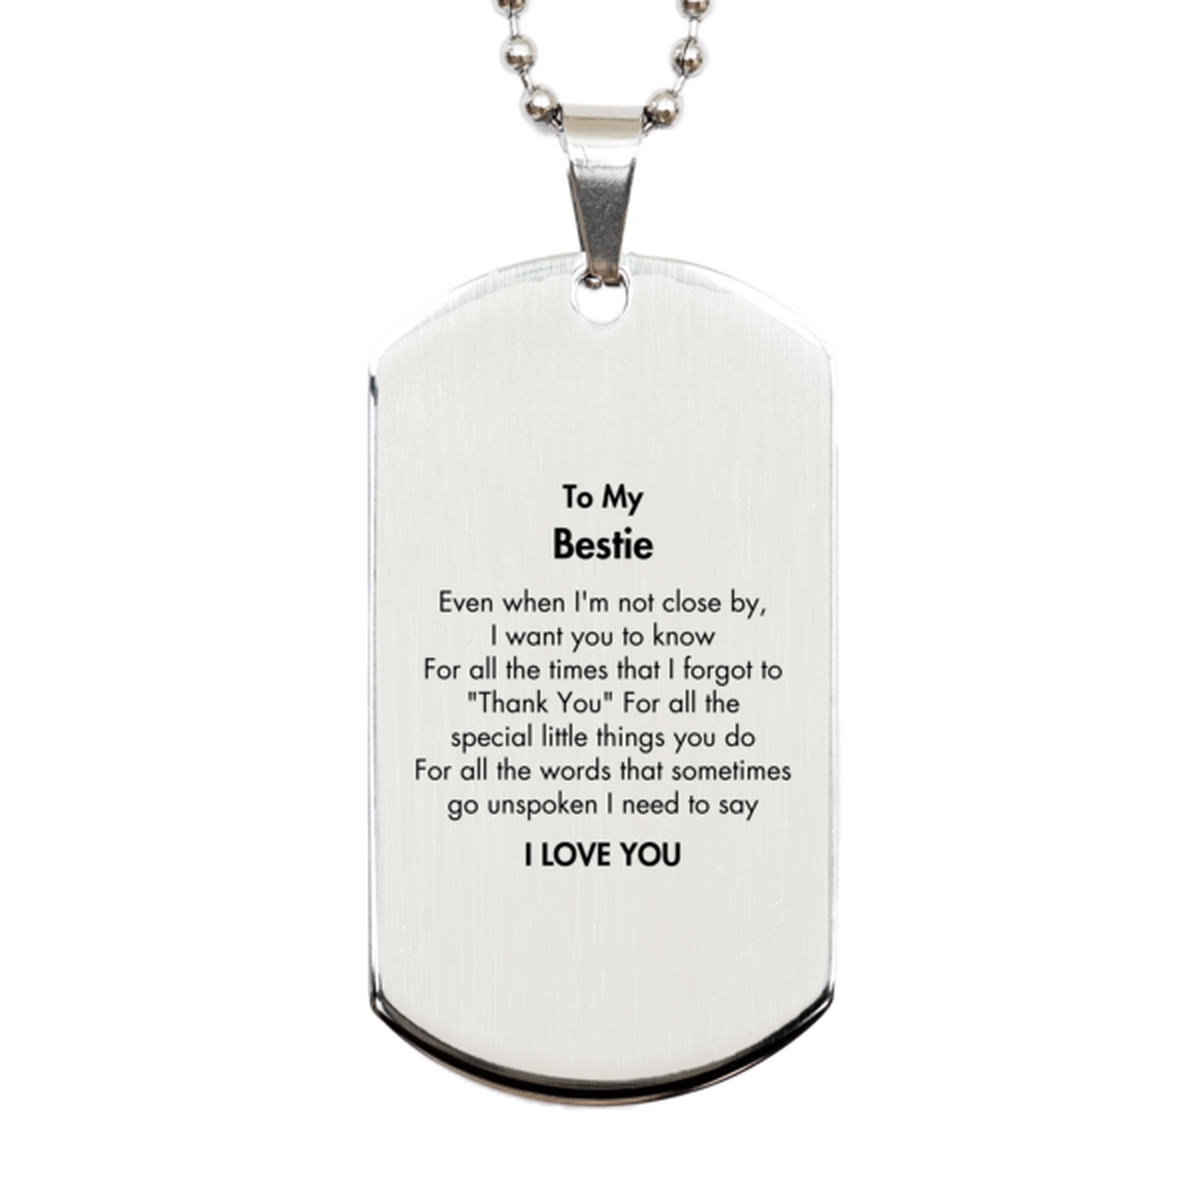 Thank You Gifts for Bestie, Keepsake Silver Dog Tag Gifts for Bestie Birthday Mother's day Father's Day Bestie For all the words That sometimes go unspoken I need to say I LOVE YOU